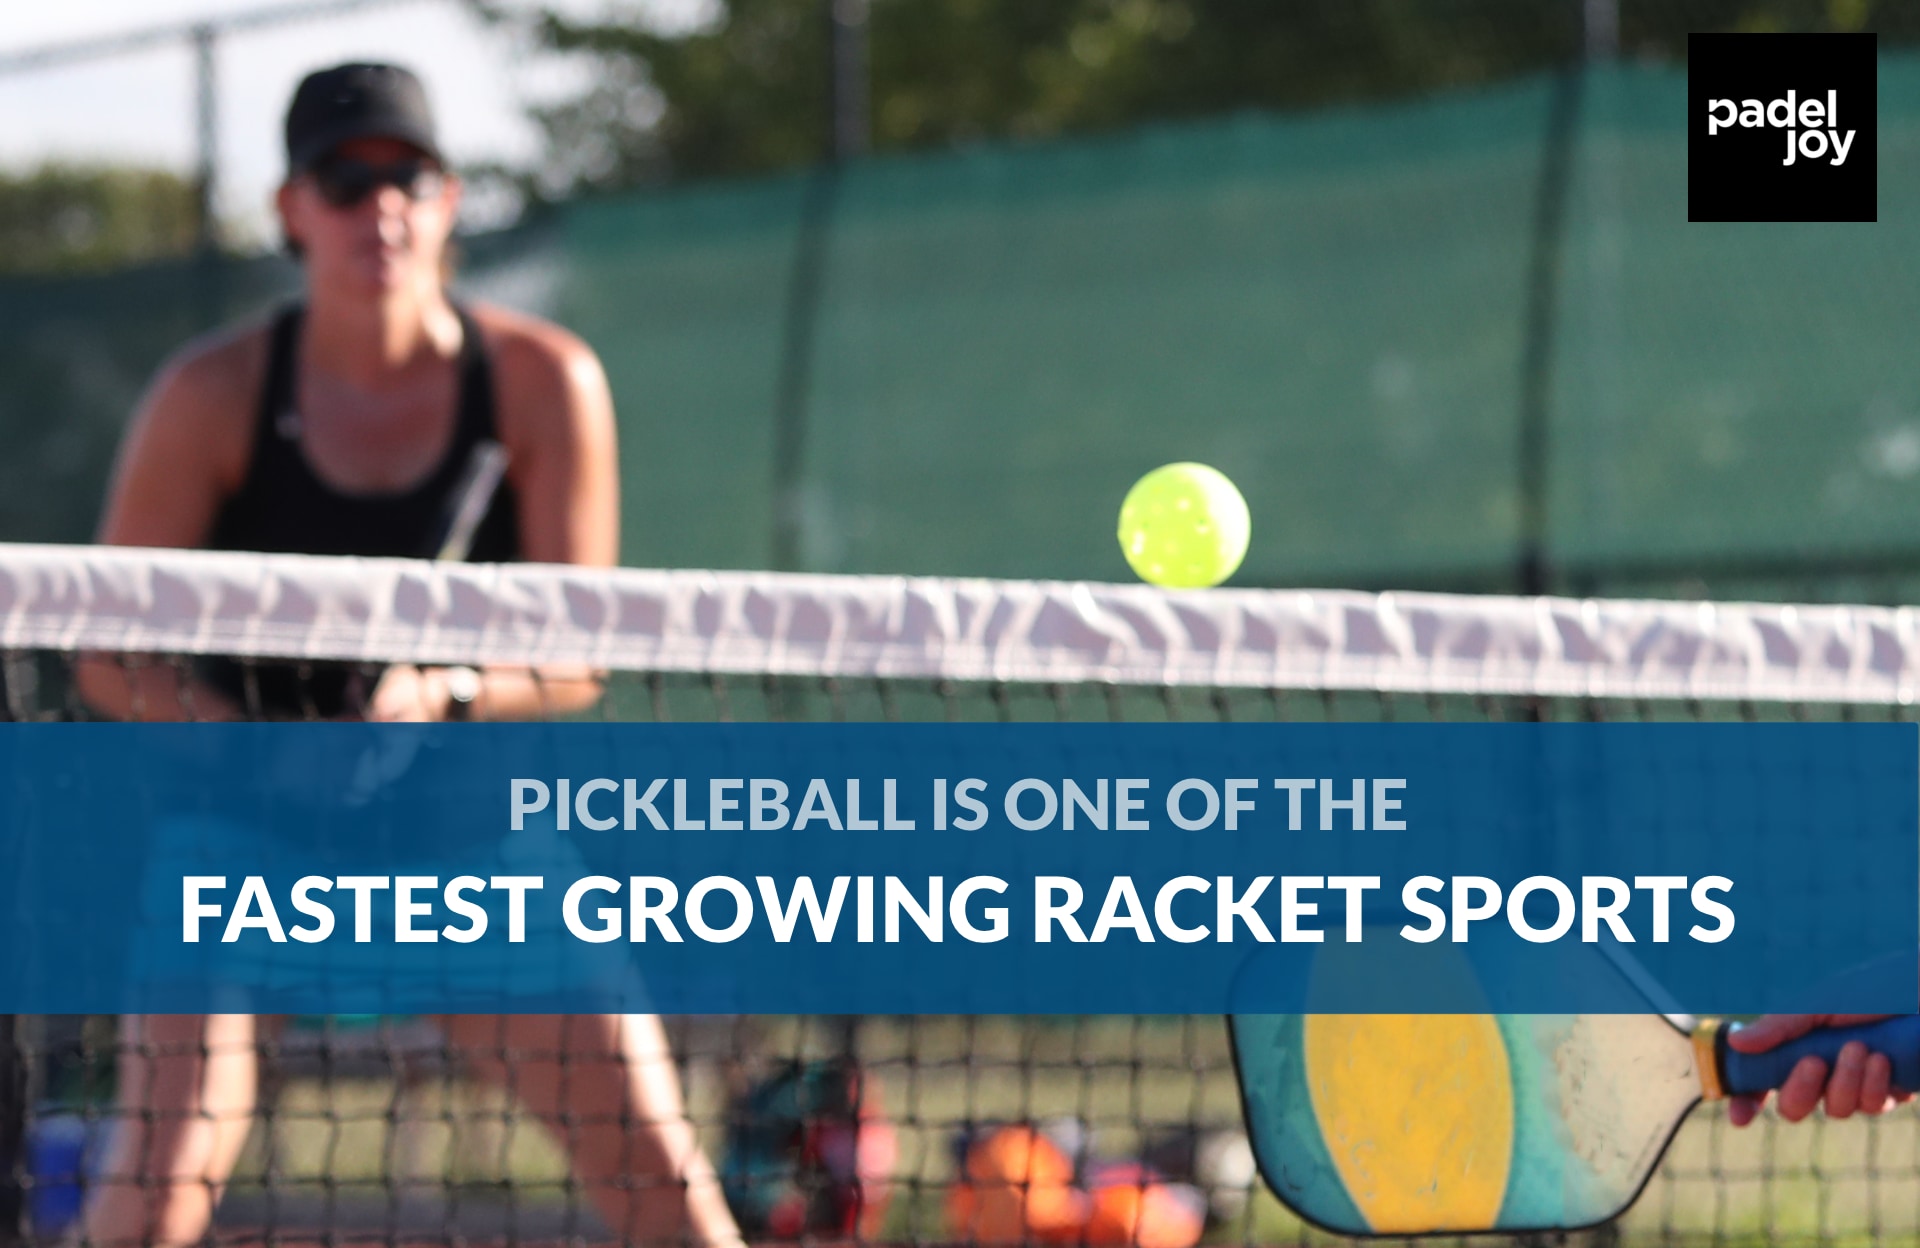 Person playing pickleball, one of the fastest growing racket sports.